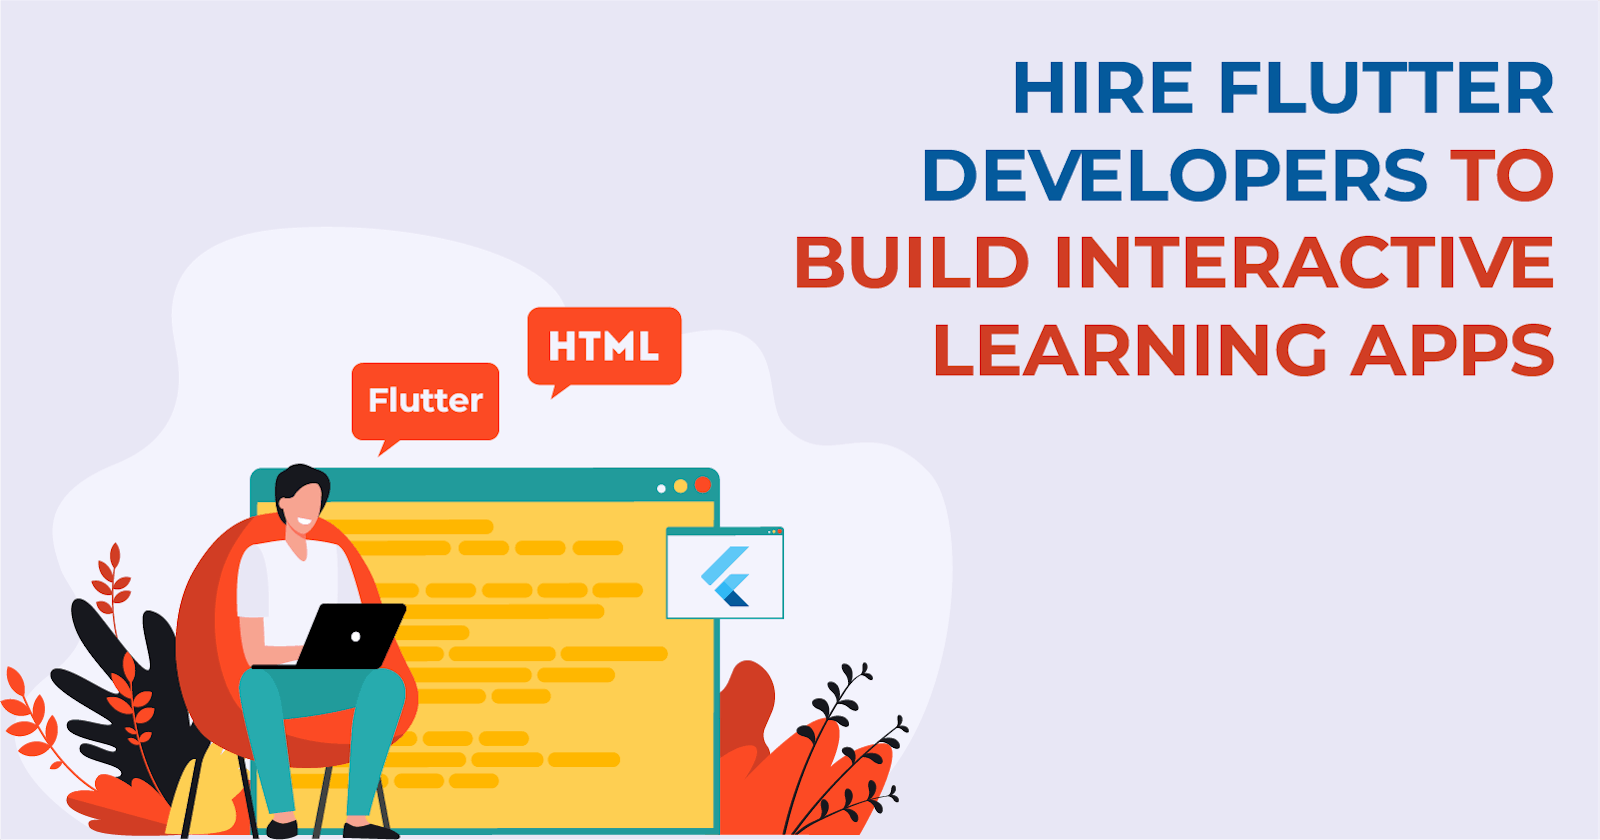 Hire Flutter Developers to Build Interactive Learning Apps